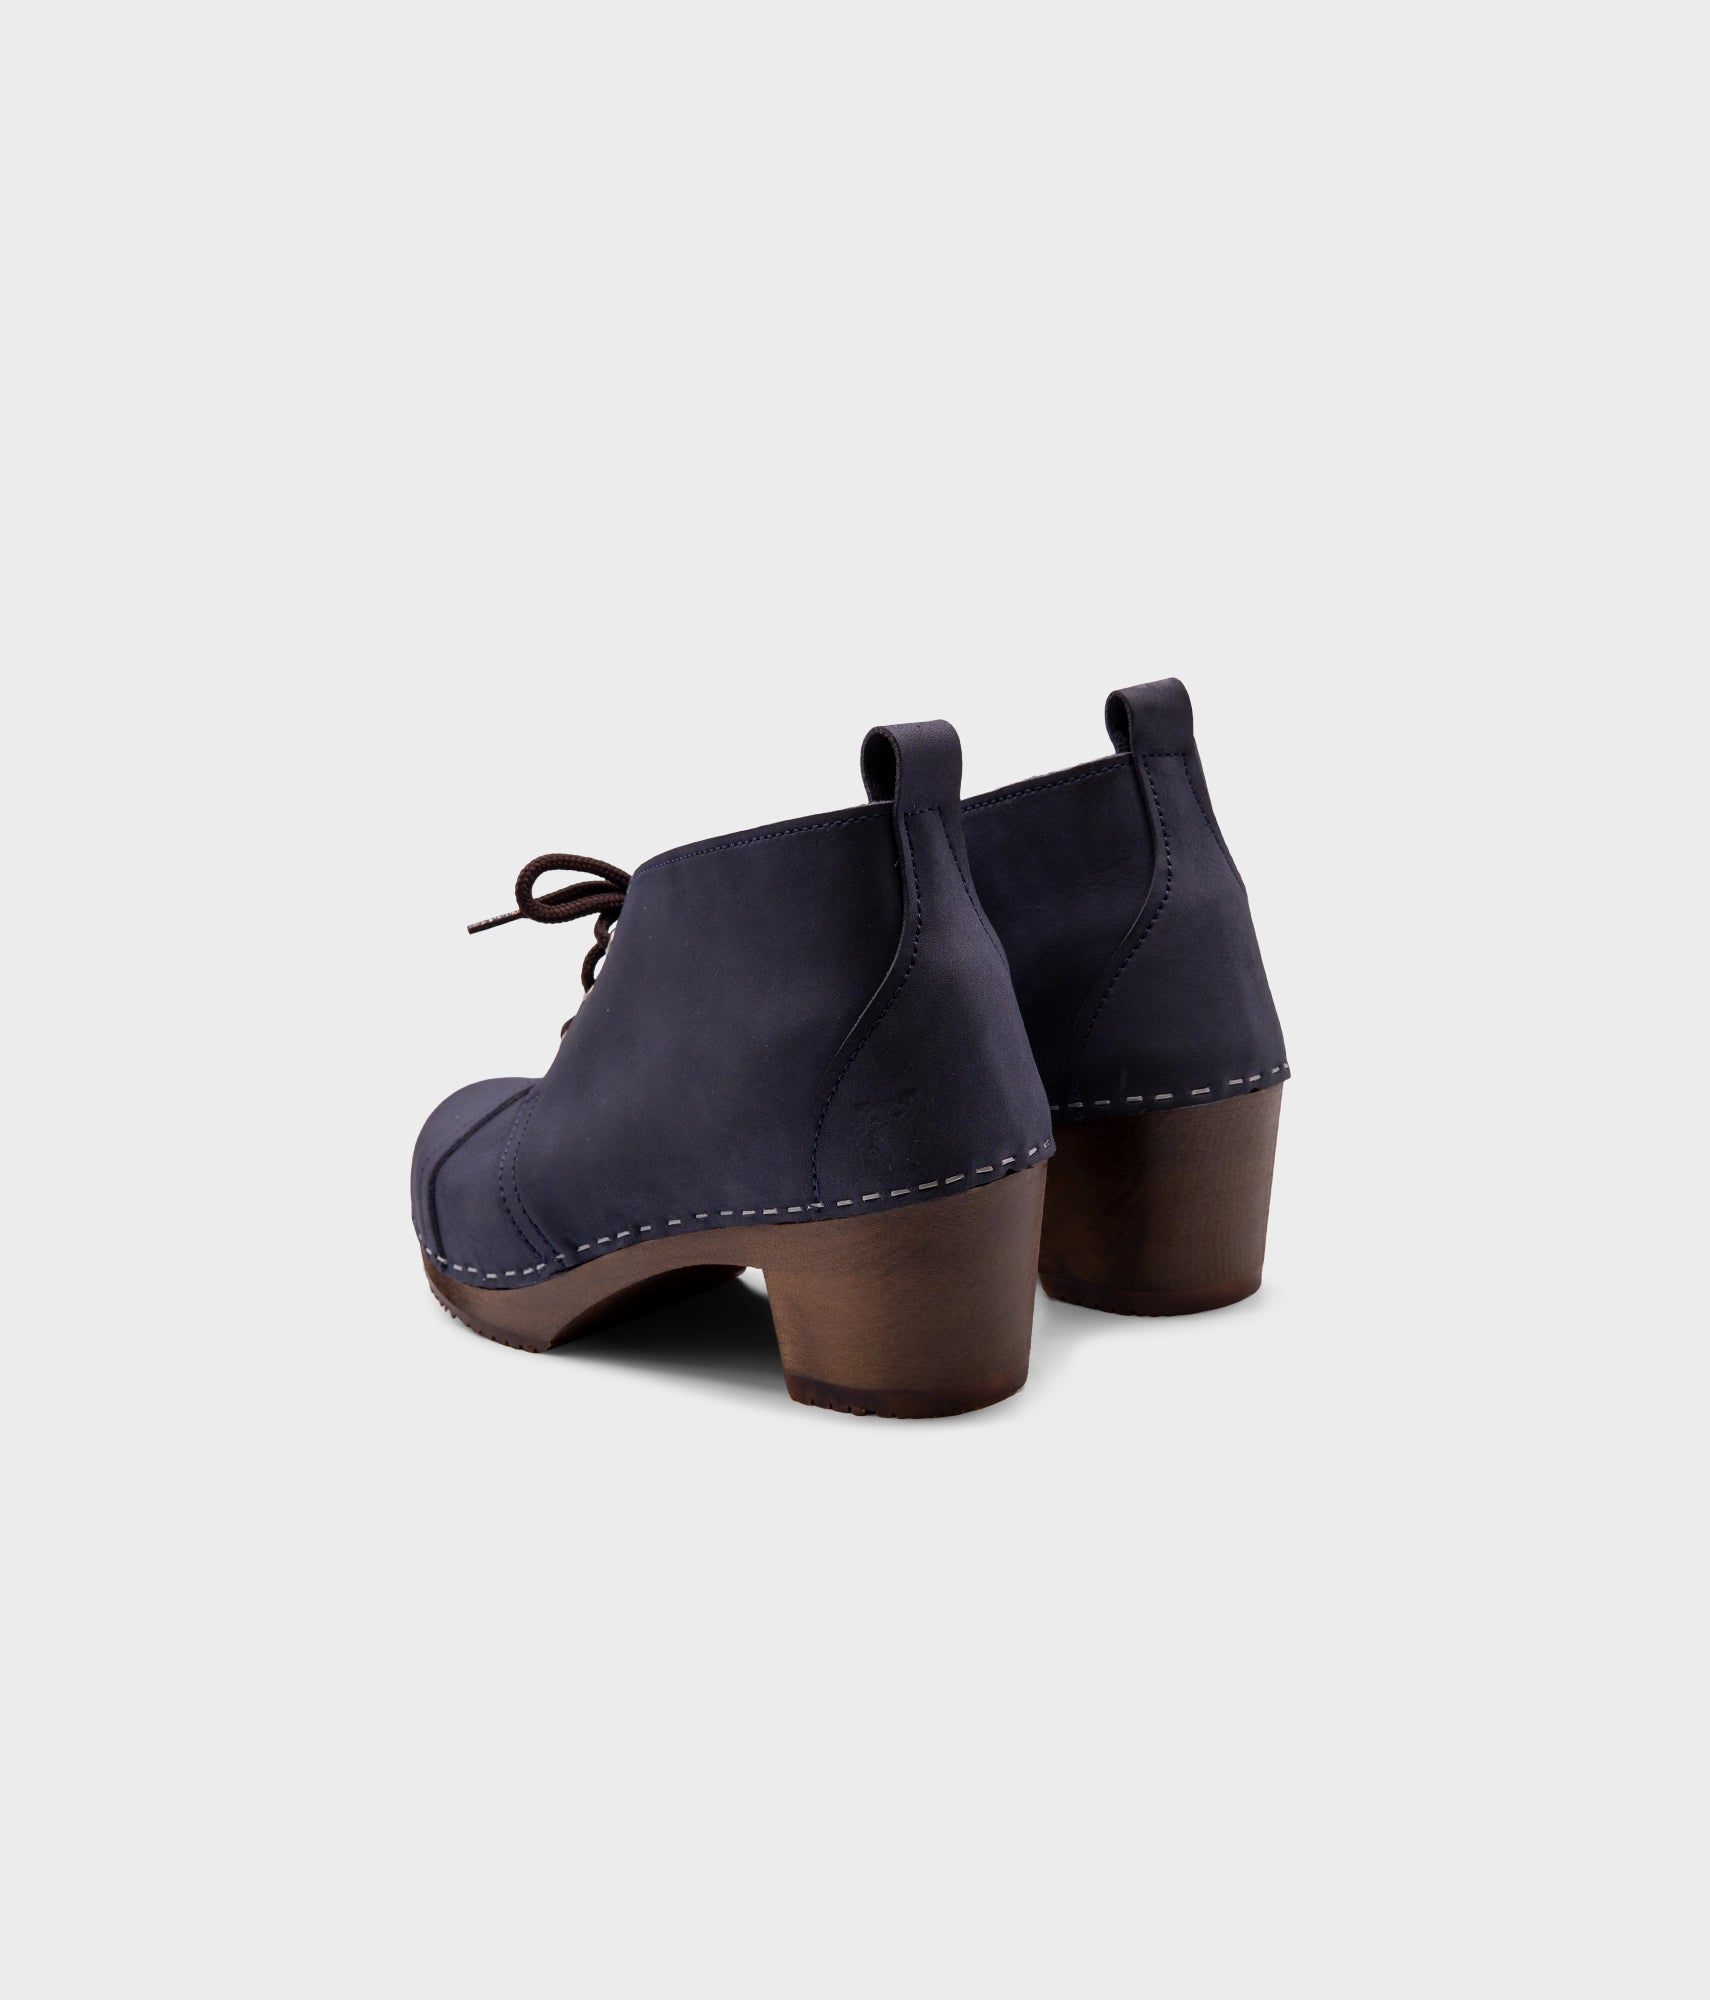 high heeled chukka clog boots in navy blue nubuck leather stapled on a dark wooden base with brown laces